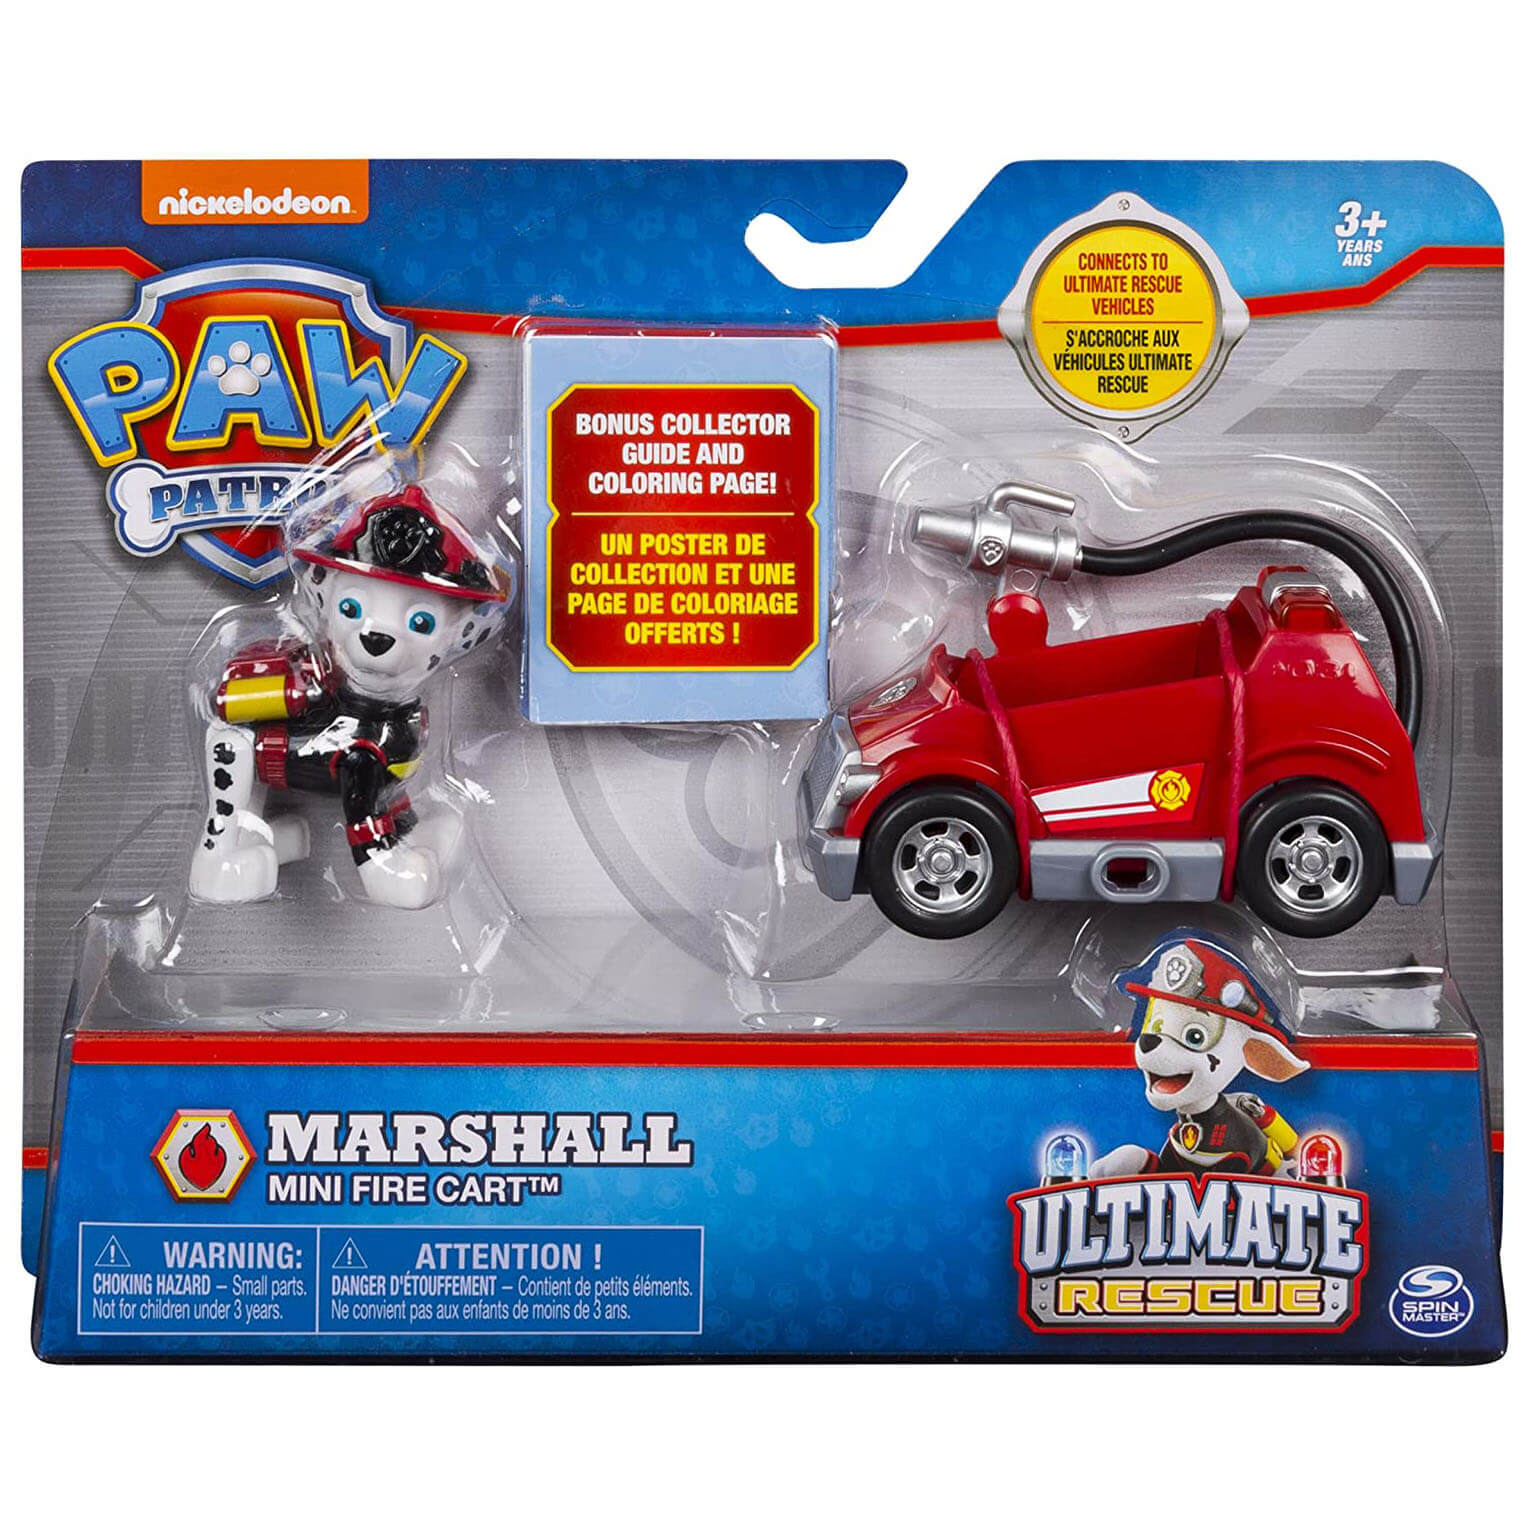 Nickelodeon PAW Patrol Ultimate Rescue Marshall Mini Fire Cart